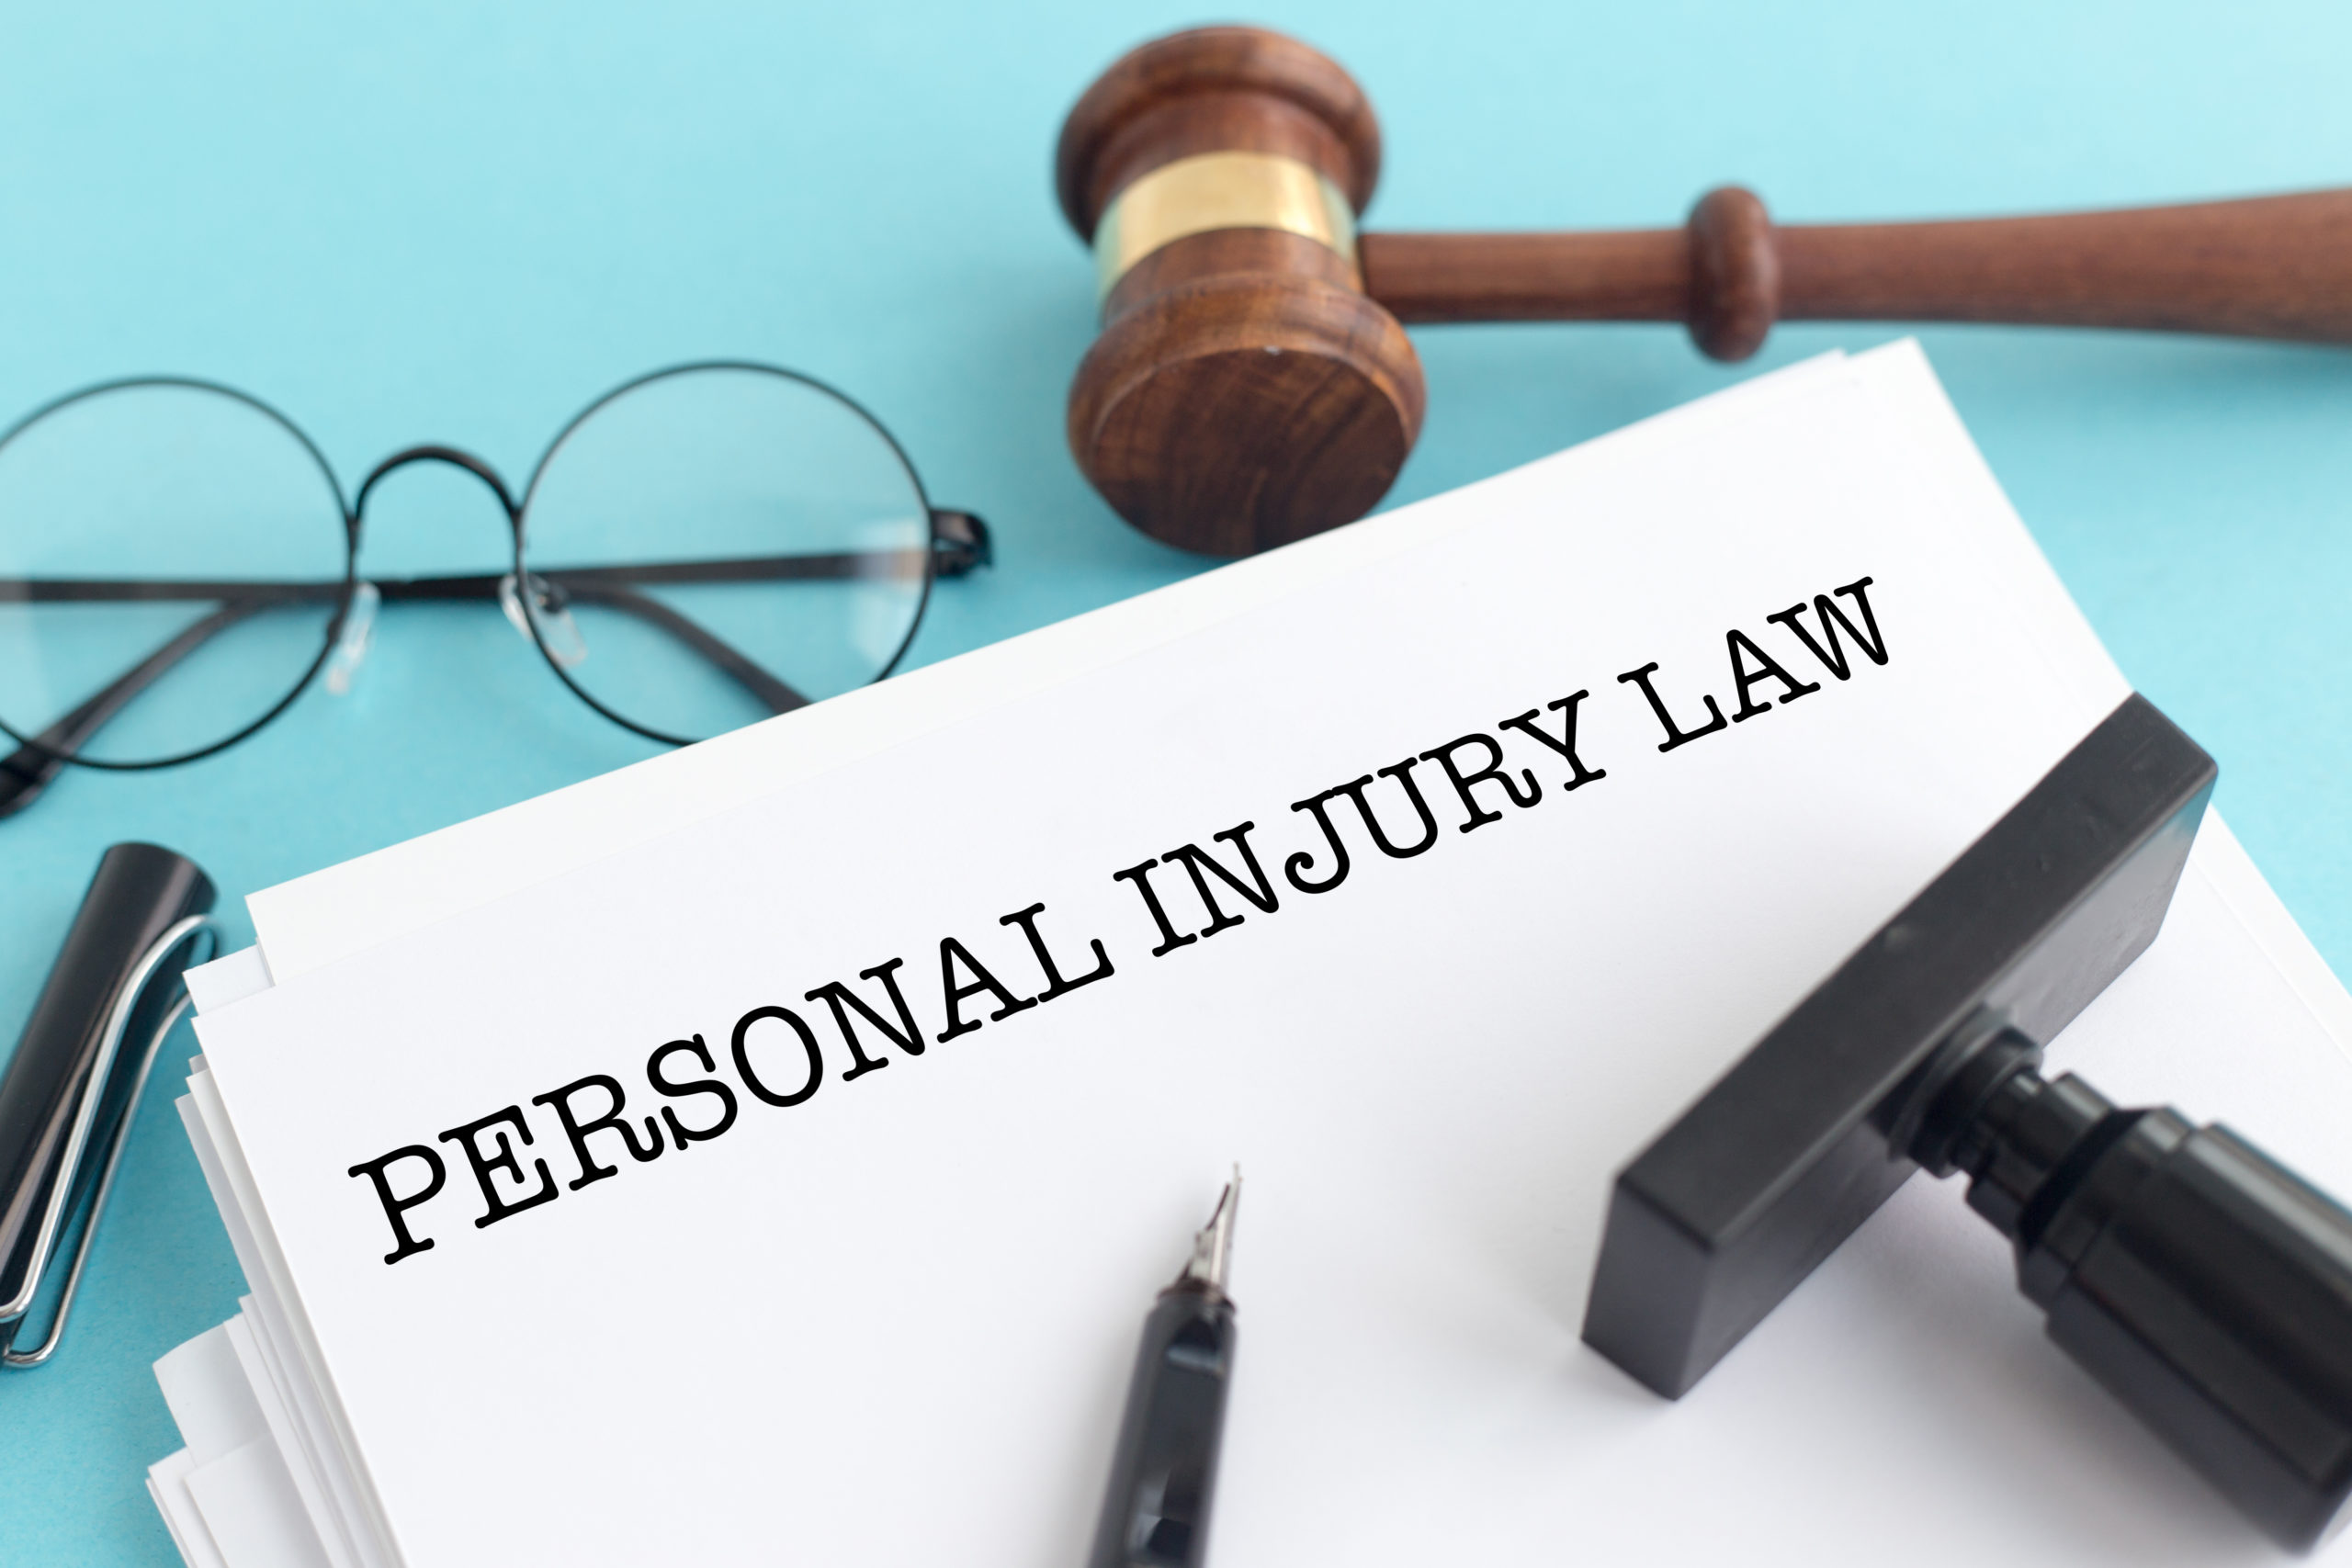 Document that says "personal injury law" and glasses, stamp, and pen